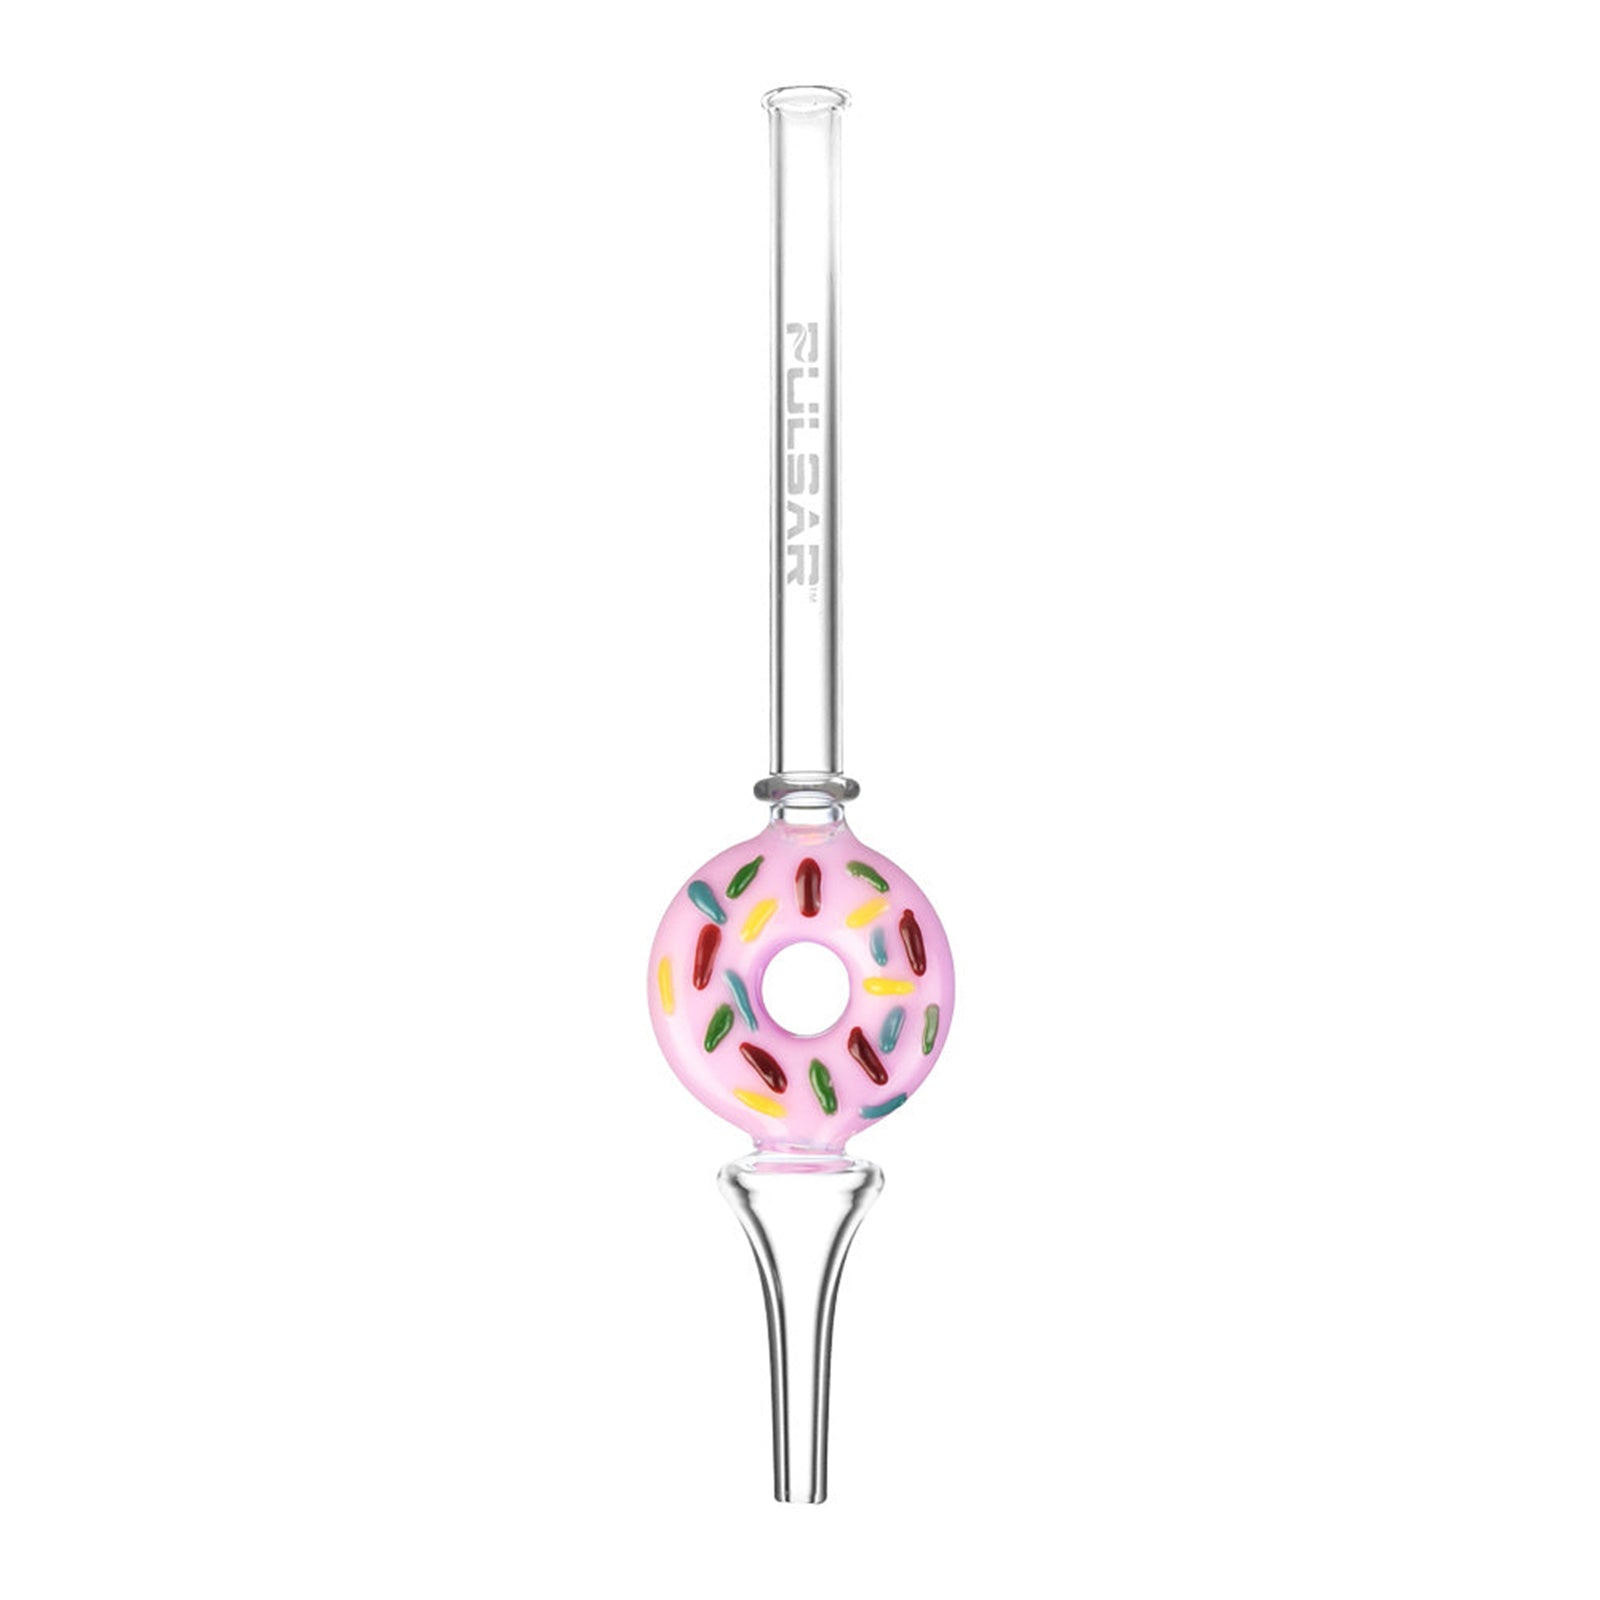 Pulsar Frosted Nectar Collector with Donut Diffuser - INHALCO